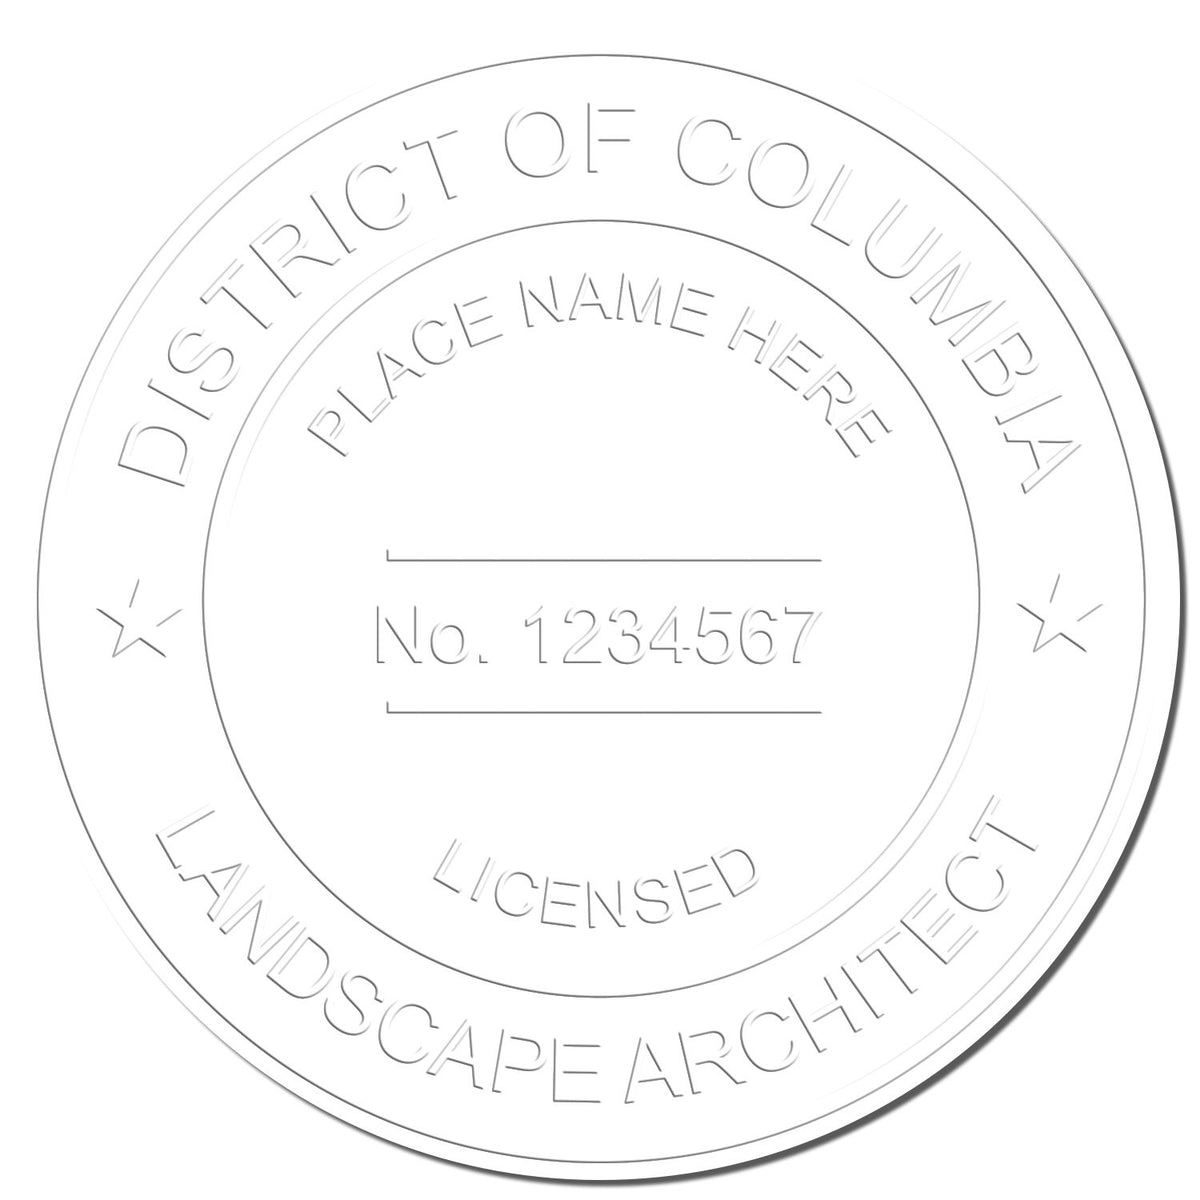 This paper is stamped with a sample imprint of the Soft Pocket District of Columbia Landscape Architect Embosser, signifying its quality and reliability.